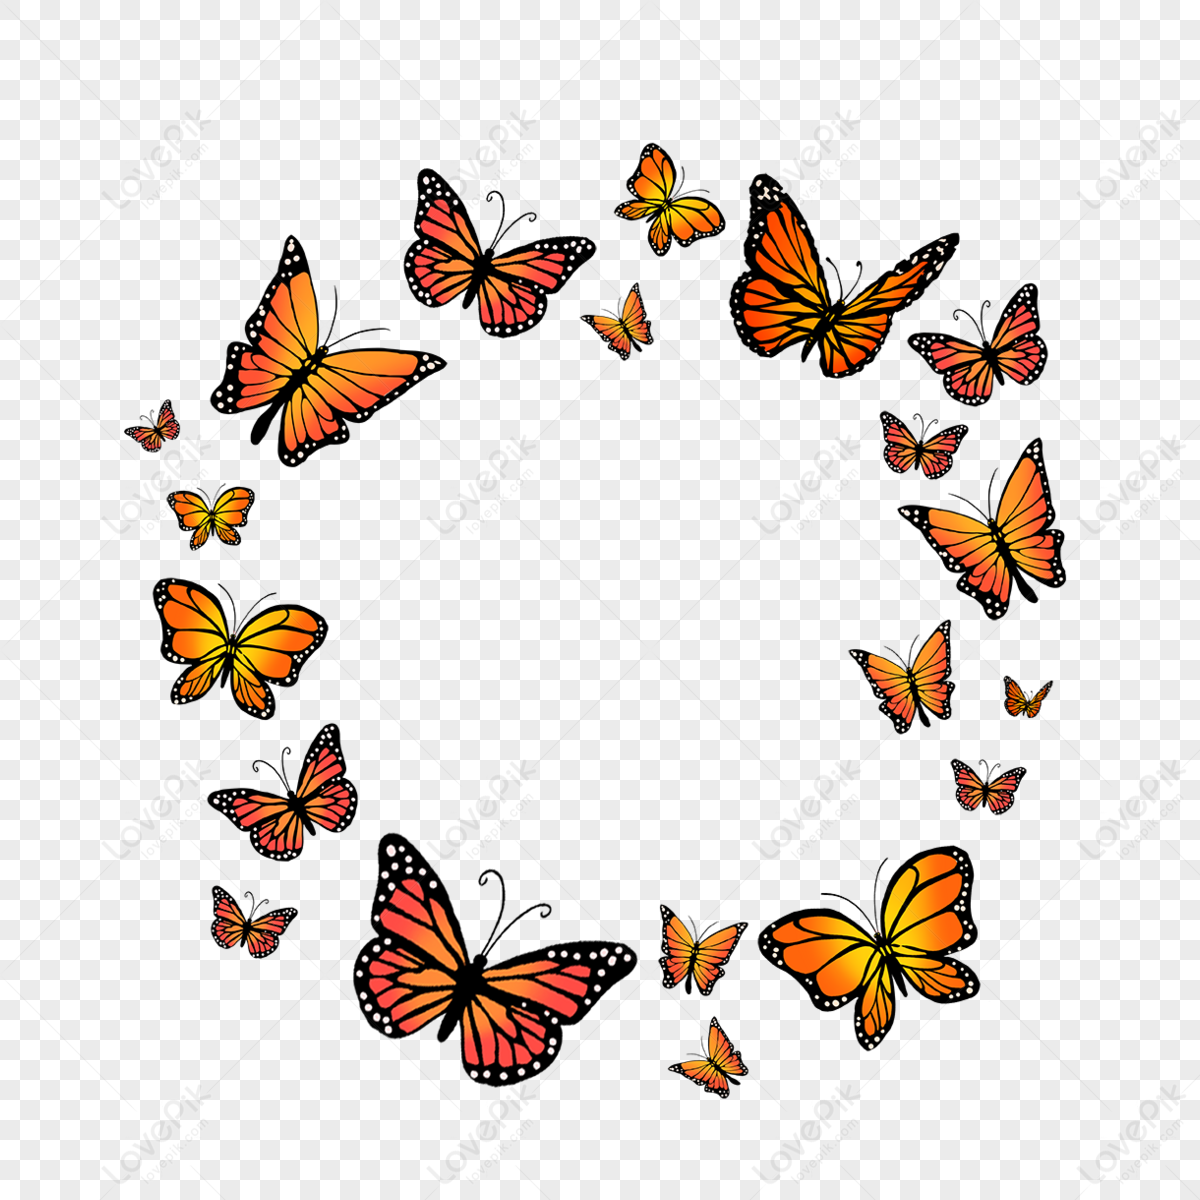 Flower butterfly png images with transparent background free download on